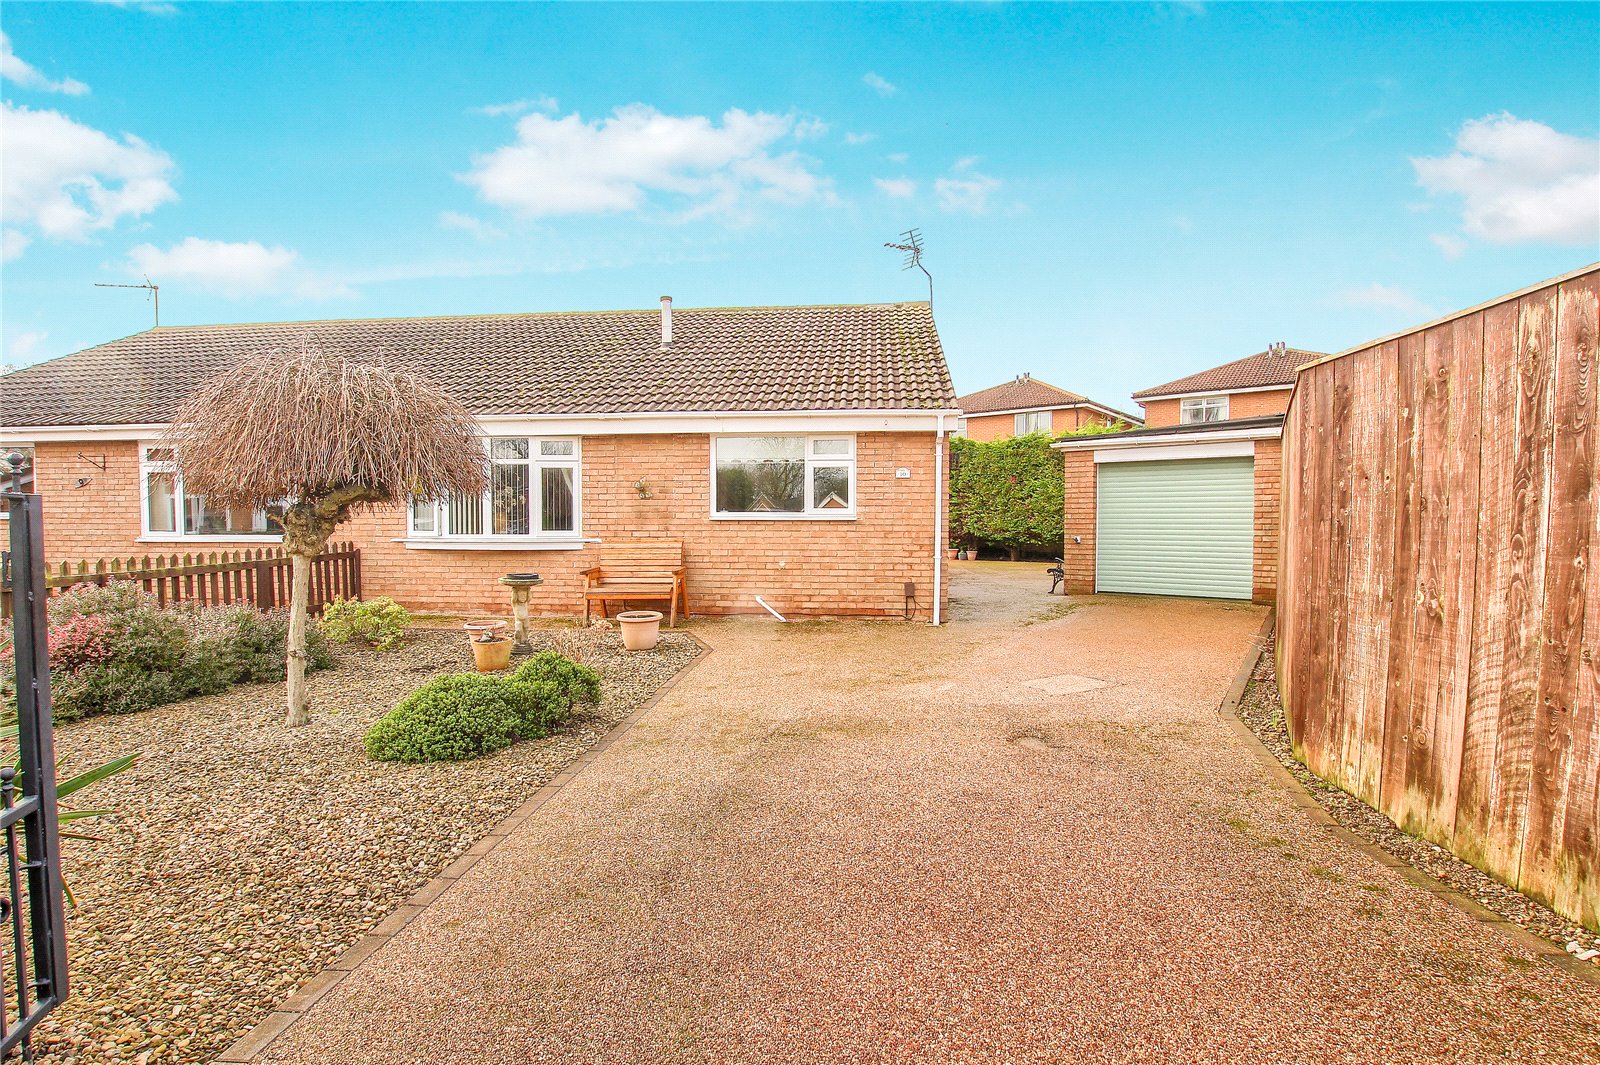 2 bed bungalow for sale in Bede Close, Stockton-on-Tees 1